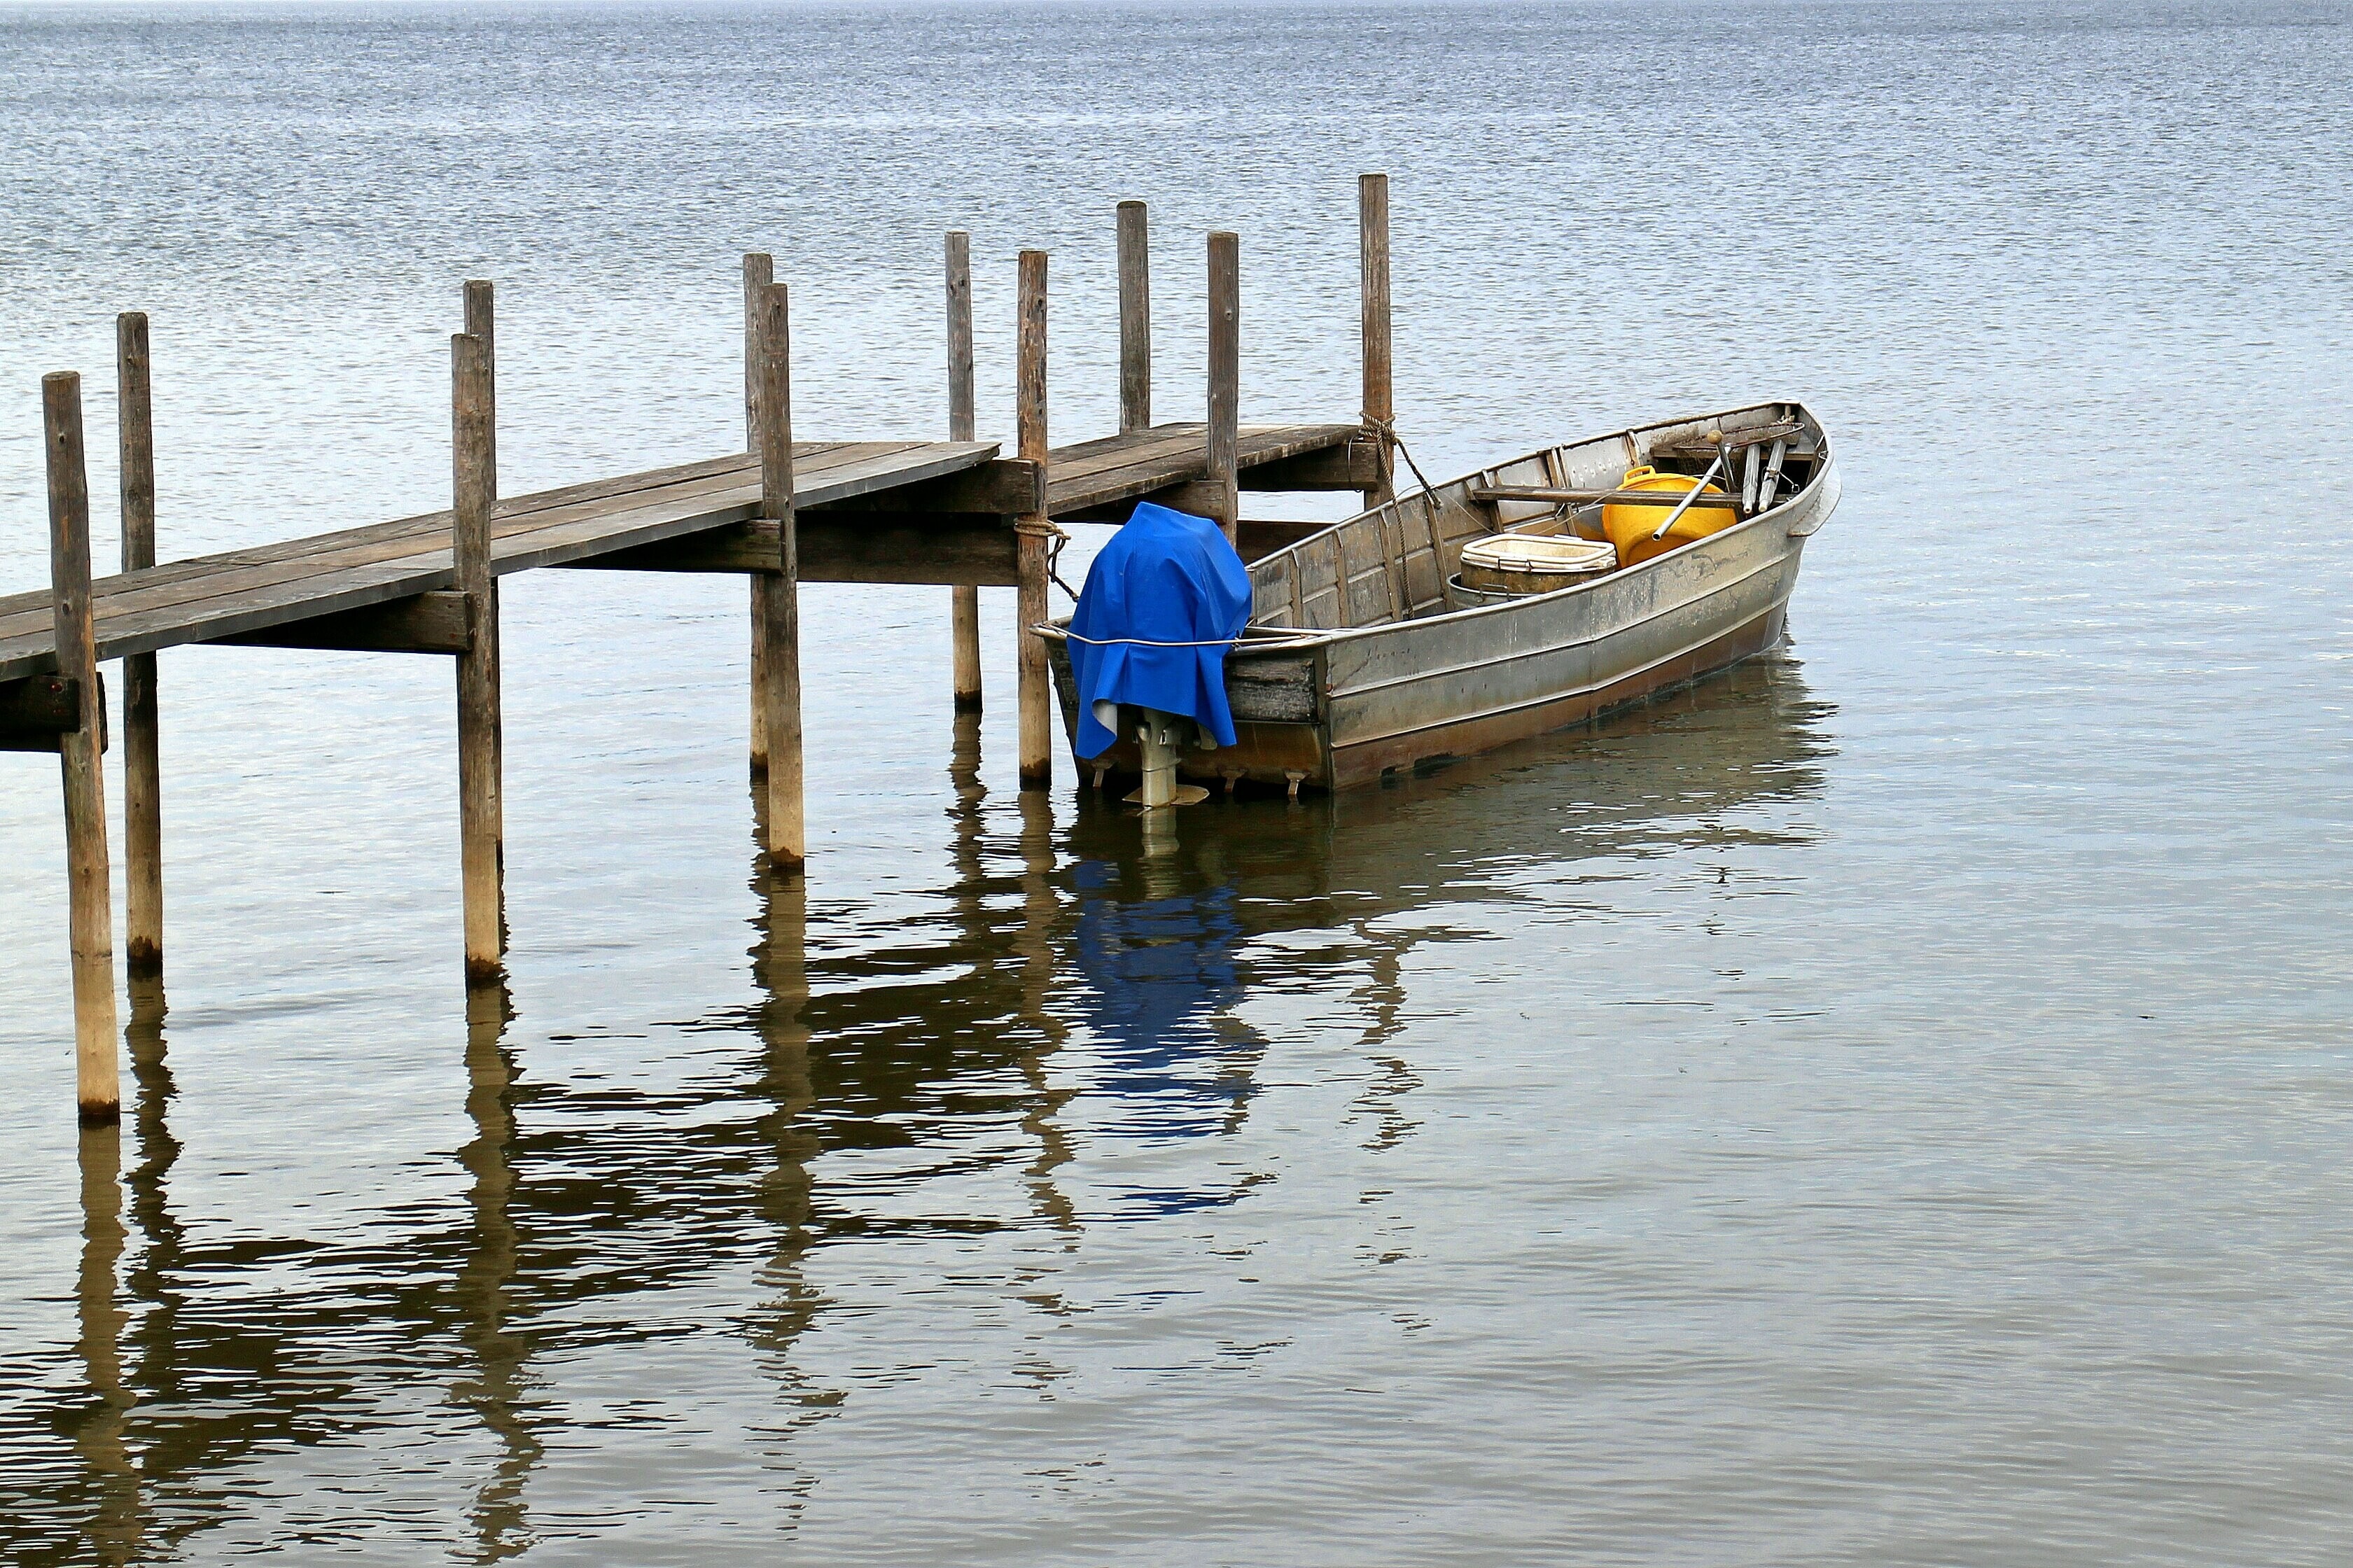 grey motor boat beside a brown wooden dock during daytime